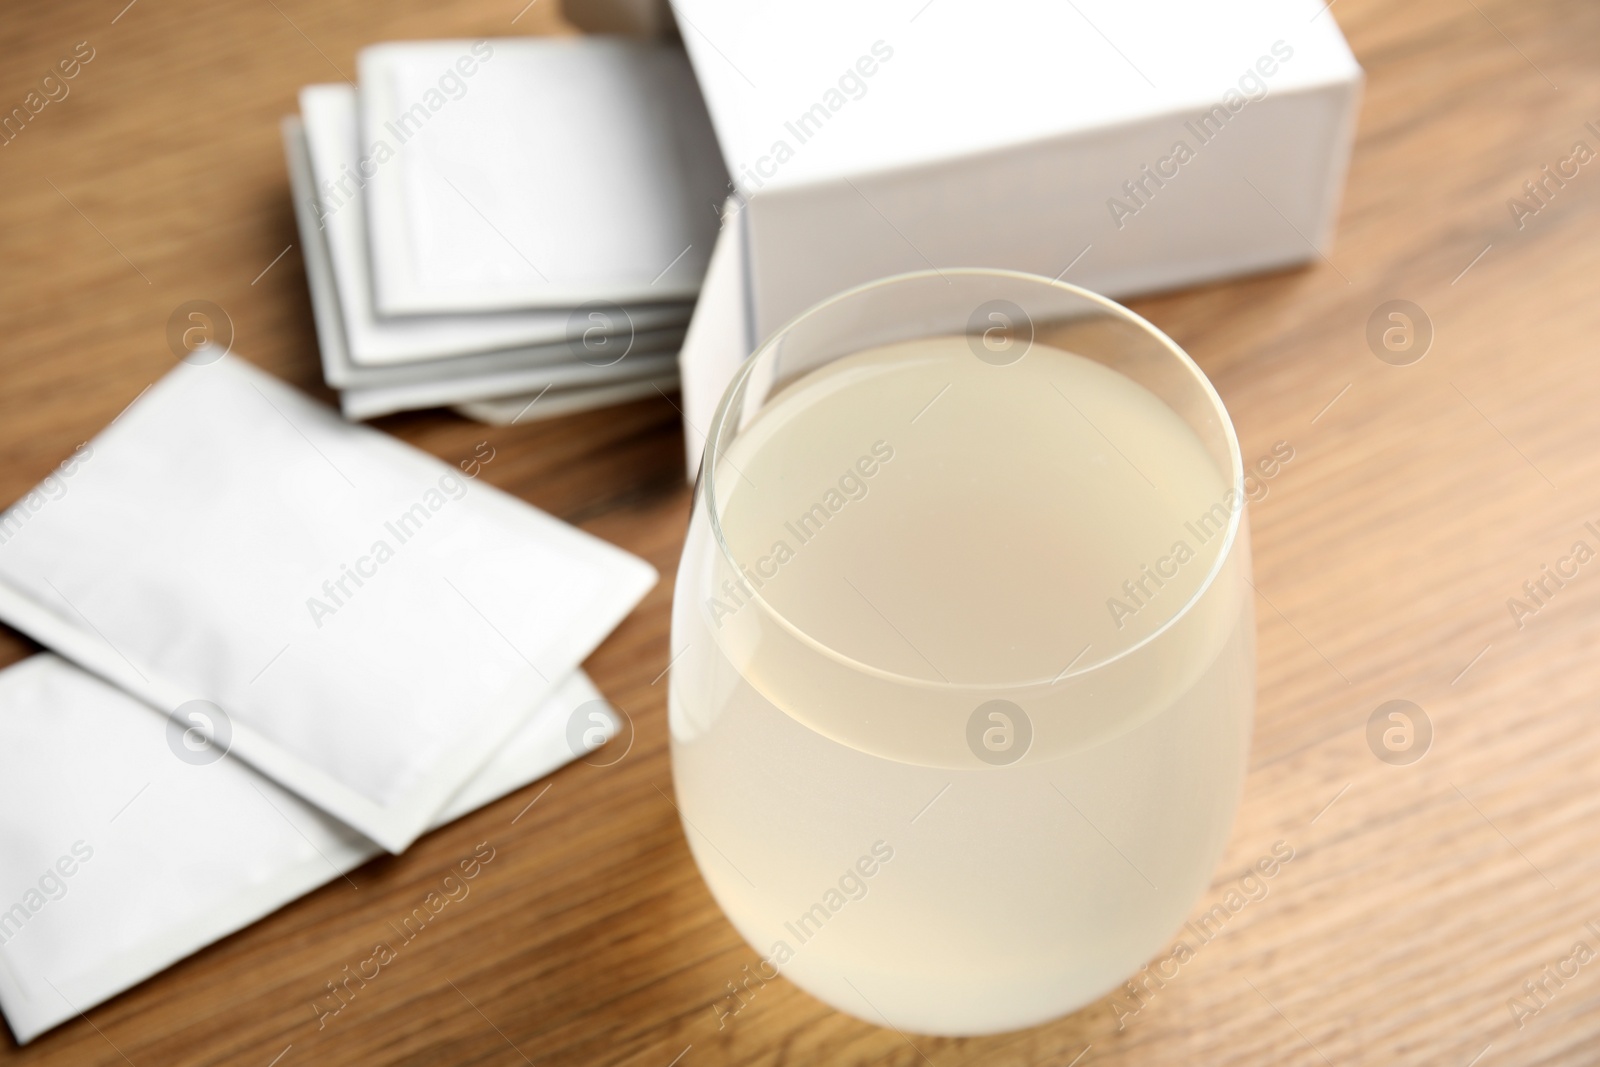 Photo of Medicine sachets and glass of water on wooden table